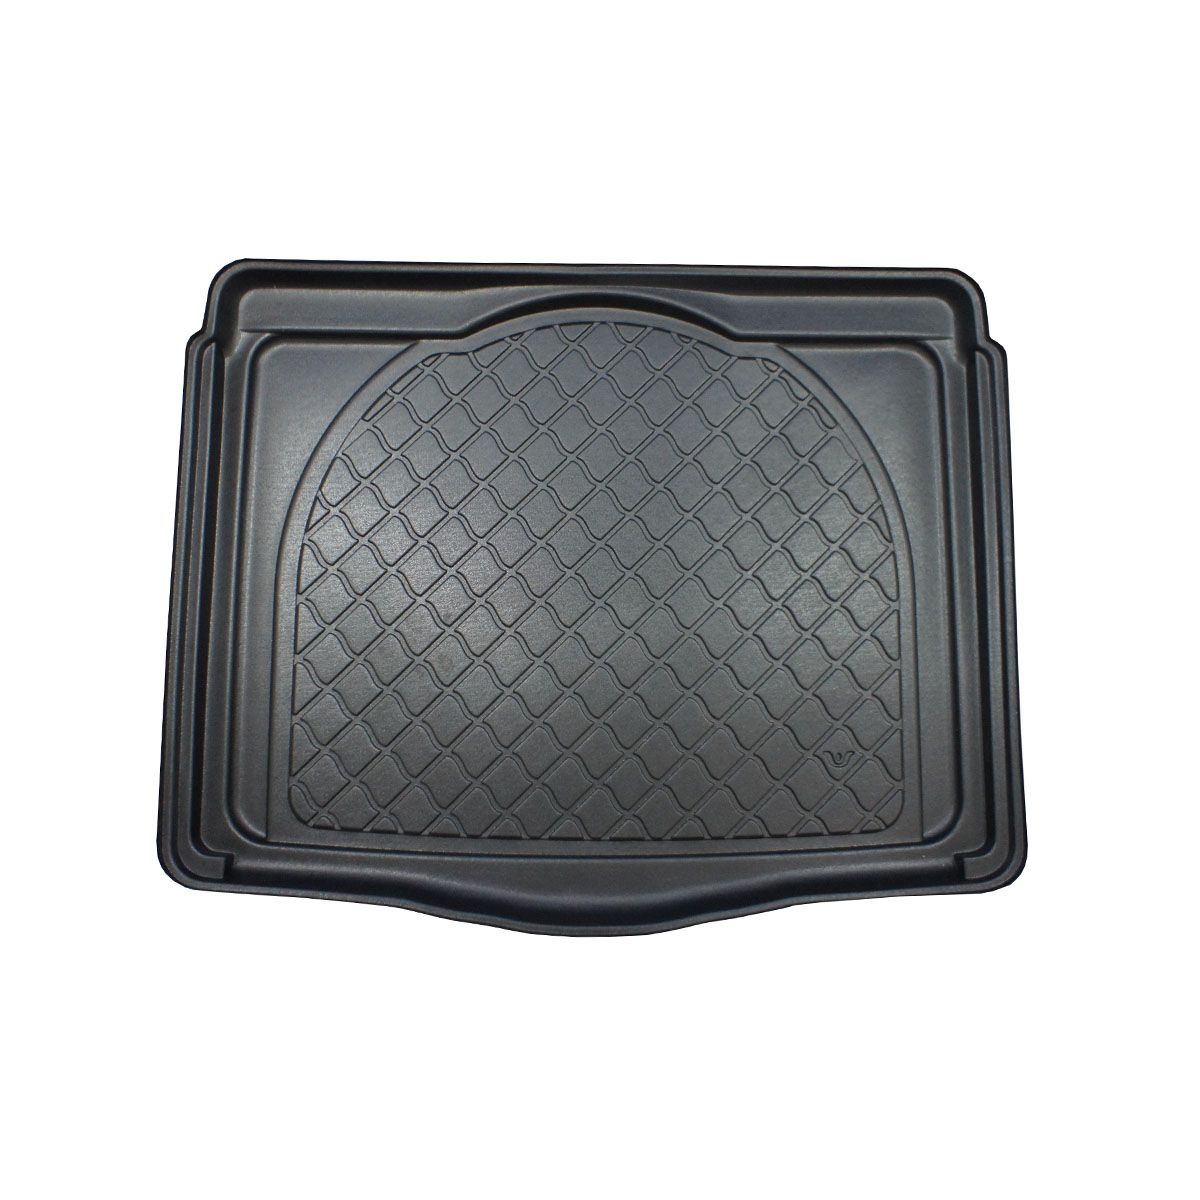 Chrysler Jeep Renegade (Sep 2014 onwards) Moulded Boot Mat product image